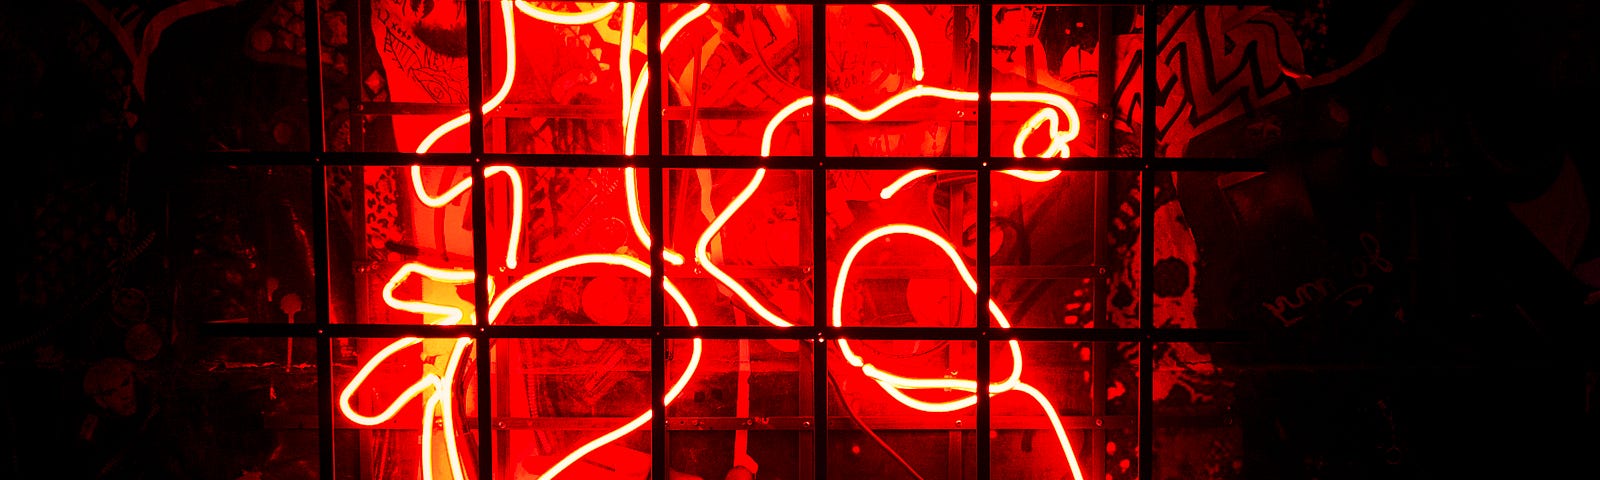 A red neon light in the shape of an anatomical human heart.